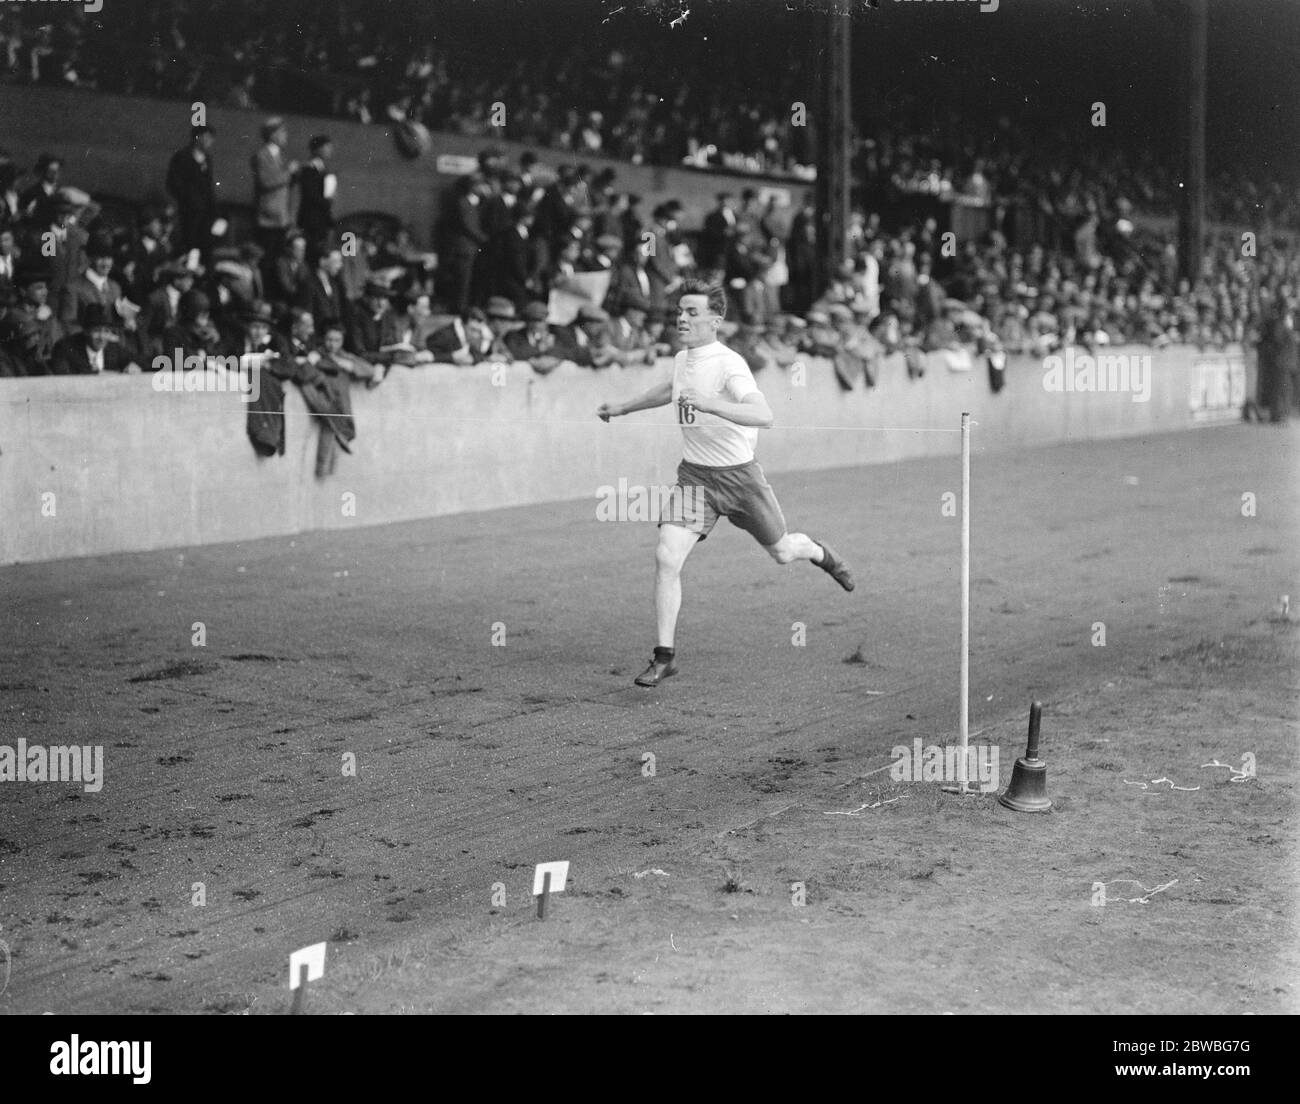 London Fire Brigade Athletics Meeting at Stamford T J W Wilcox wins the 440 flat race handicap  13 August 1921 Stock Photo